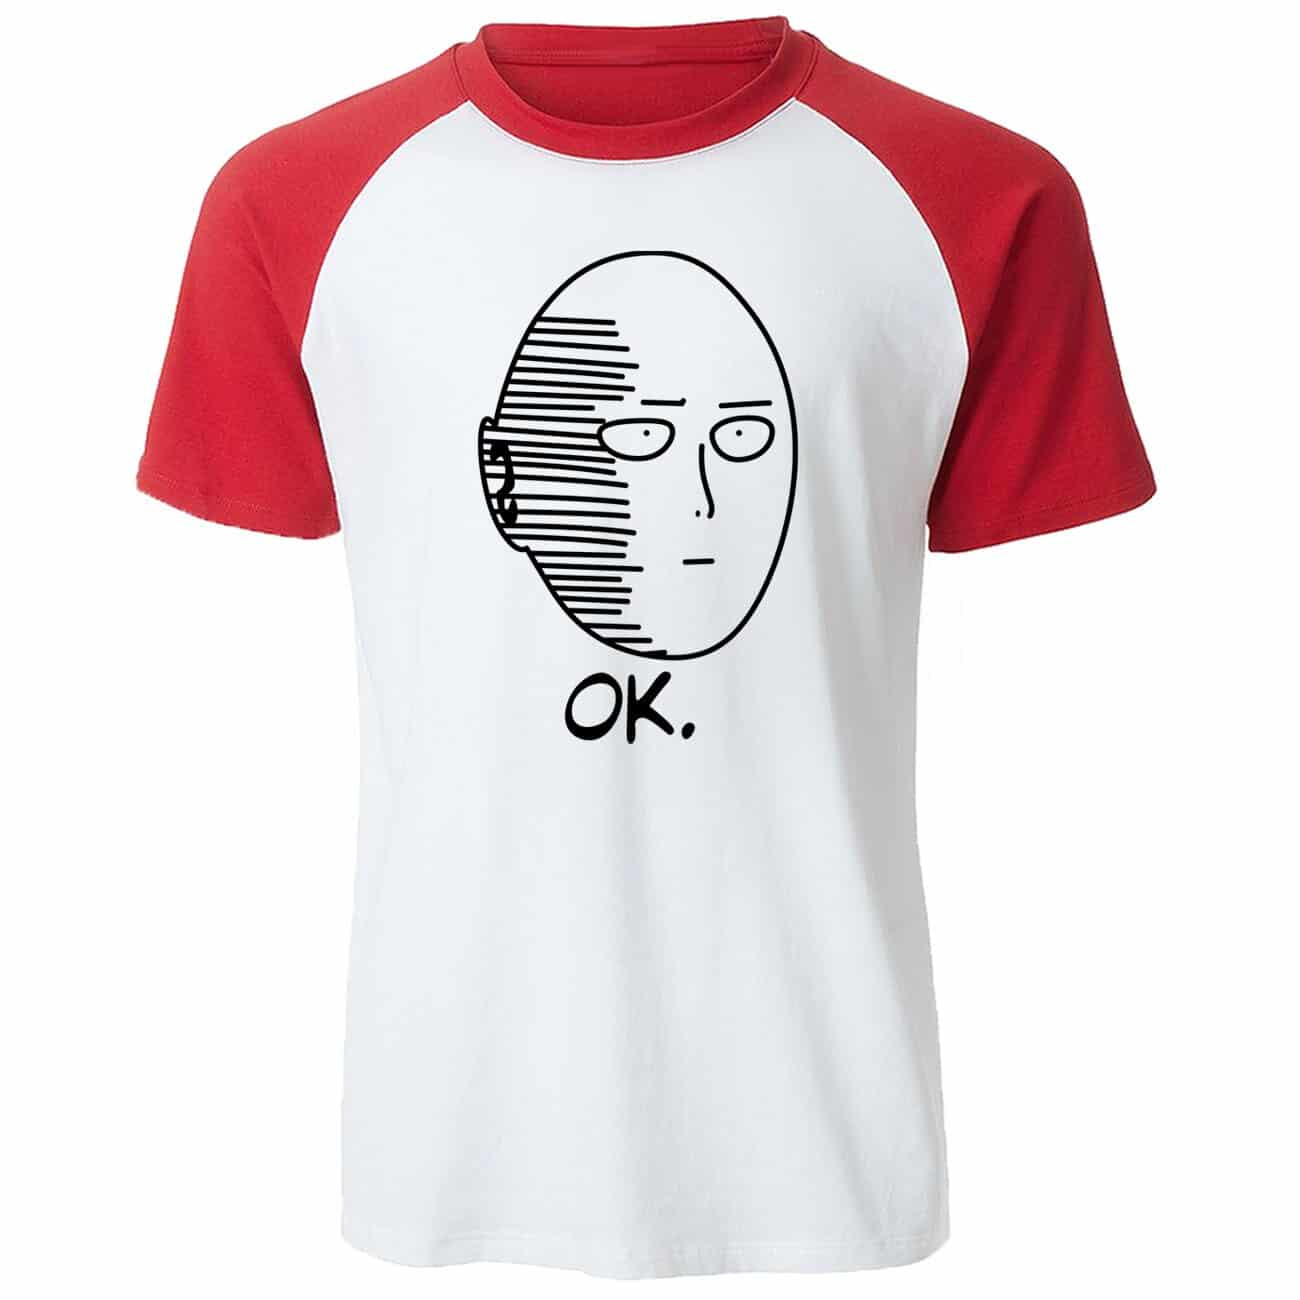 Red One Punch Man T-shirt With Saitama And Ok.